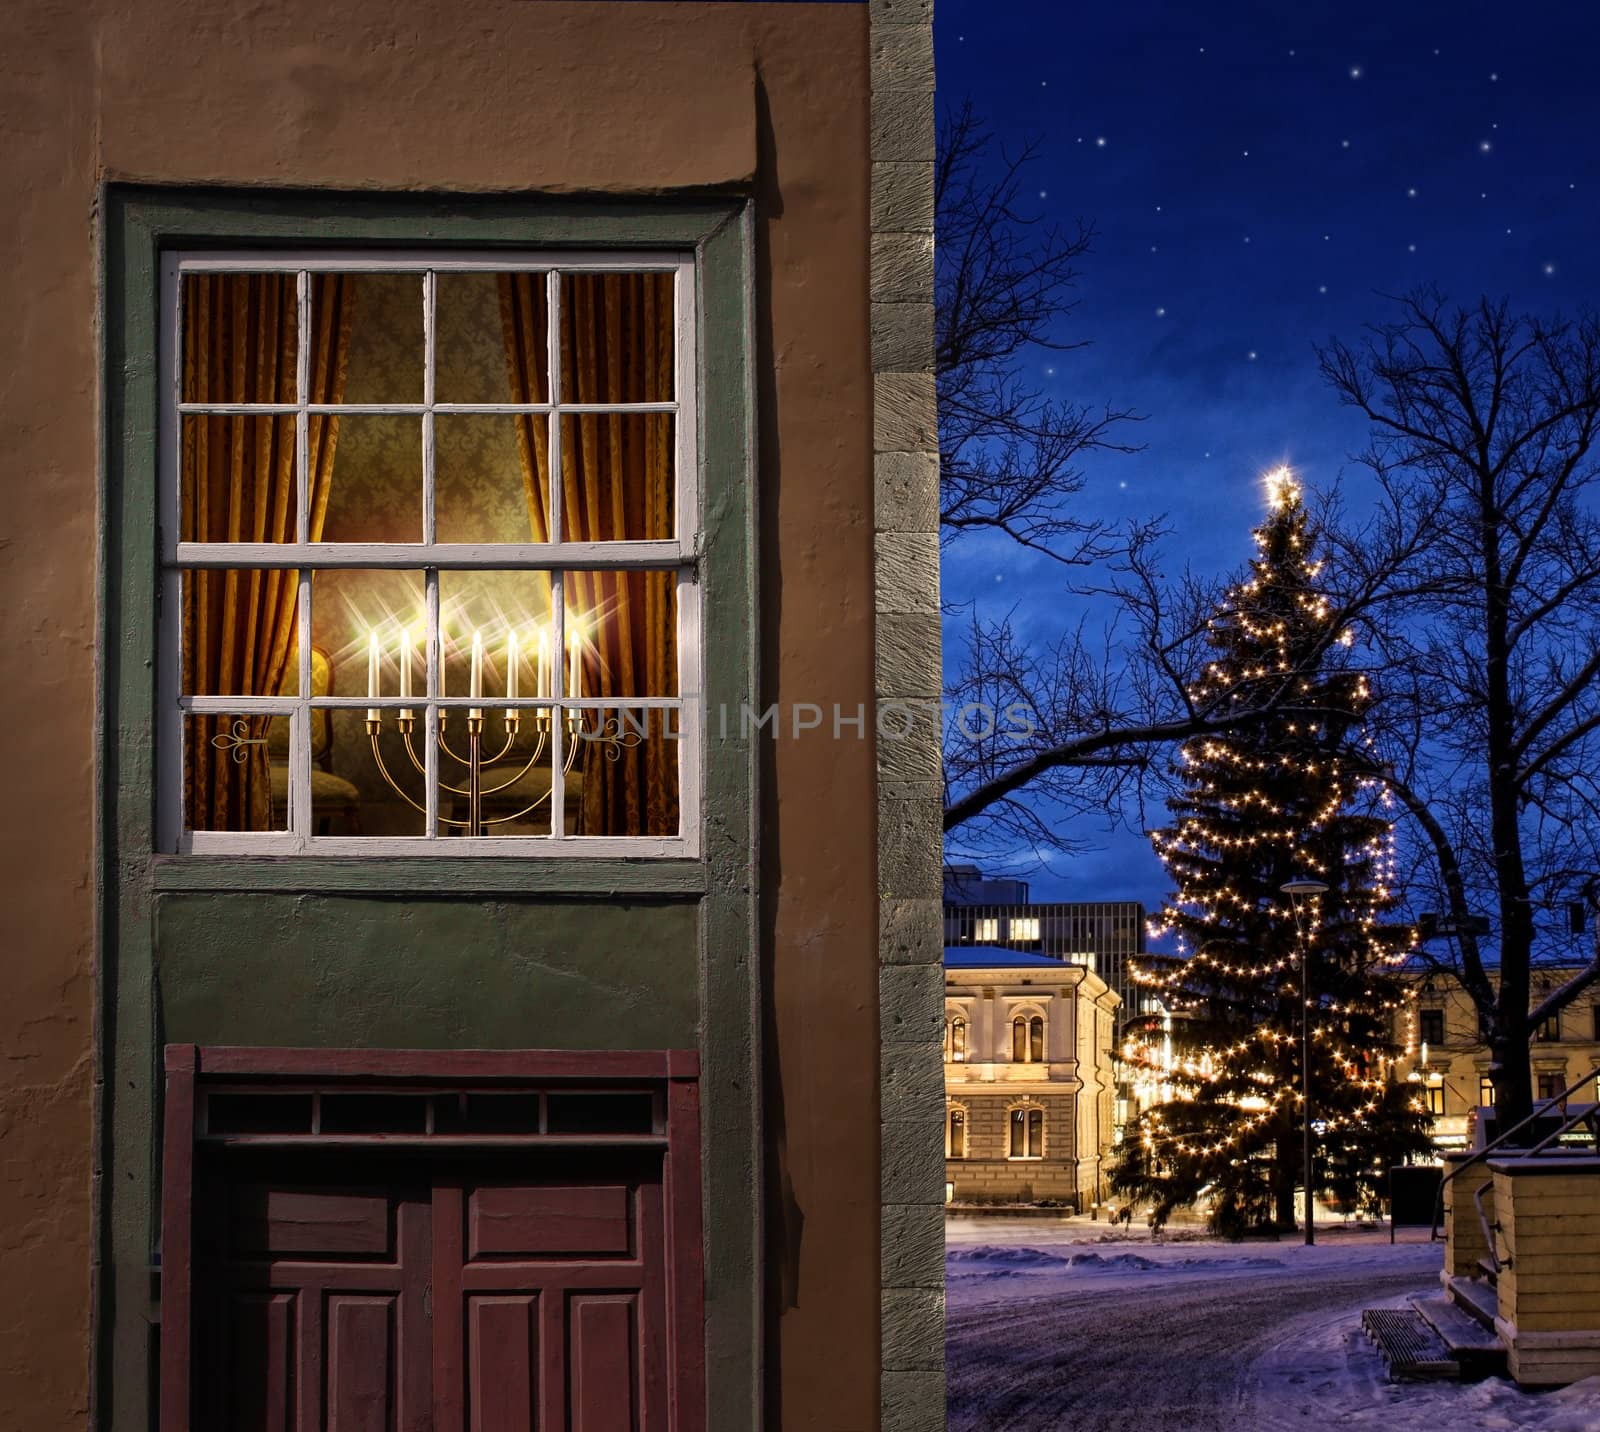 Christmas in snowy little town by anterovium